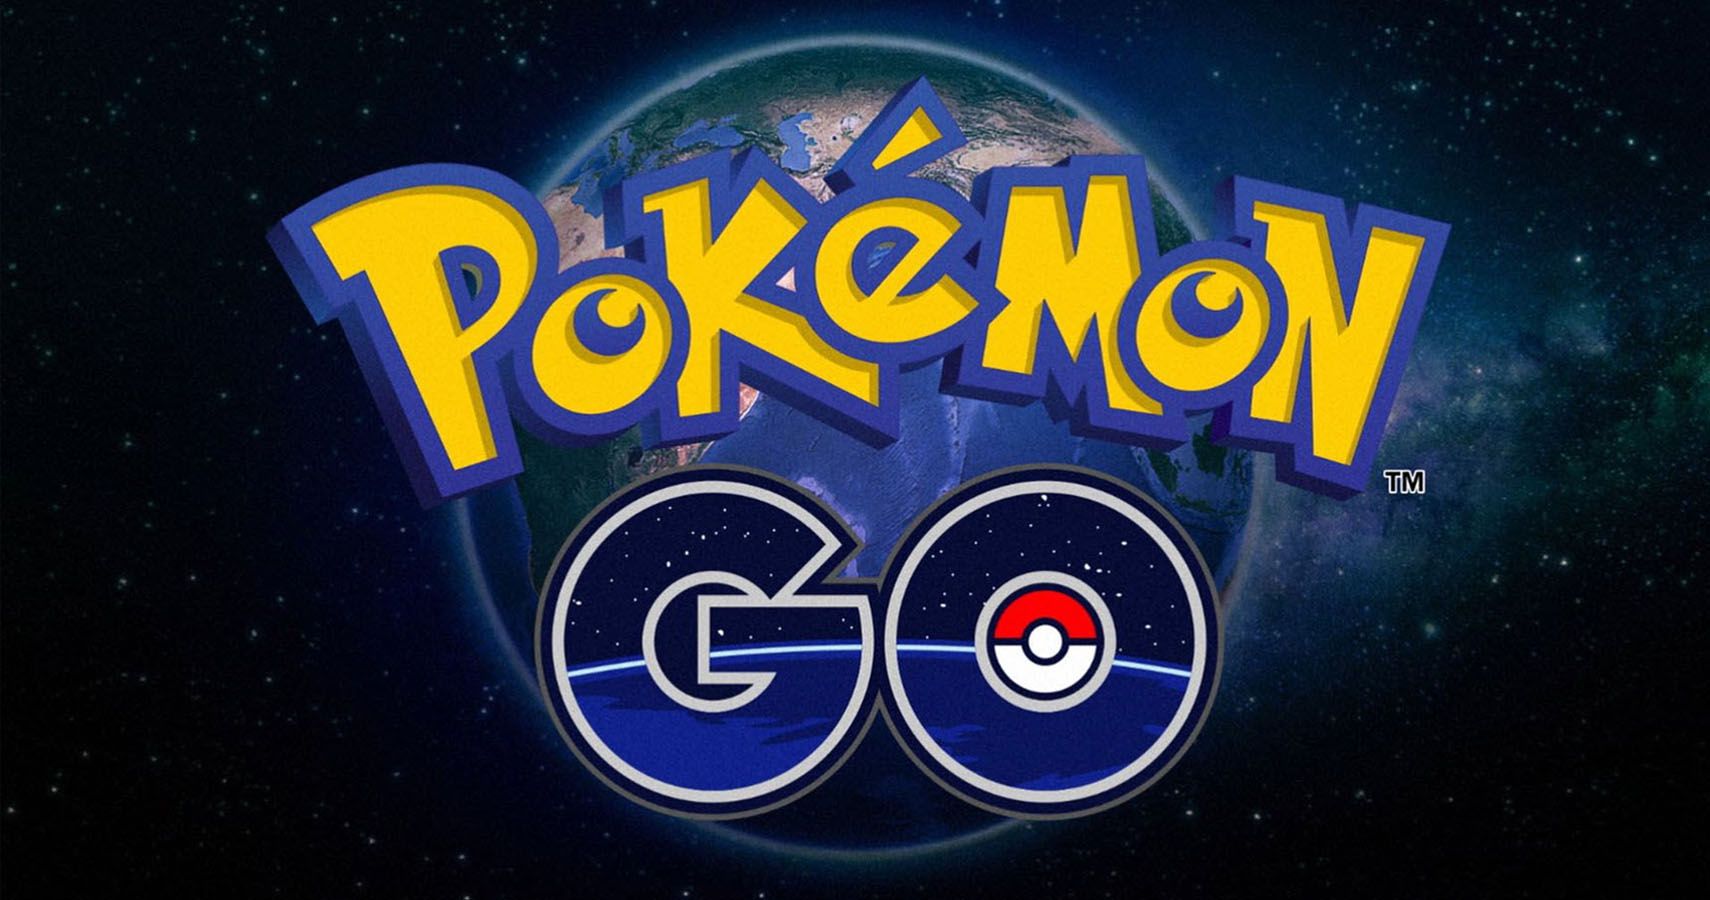 Leaked Files Say Pokémon GO Will Be Getting FitnessBased Quests Soon